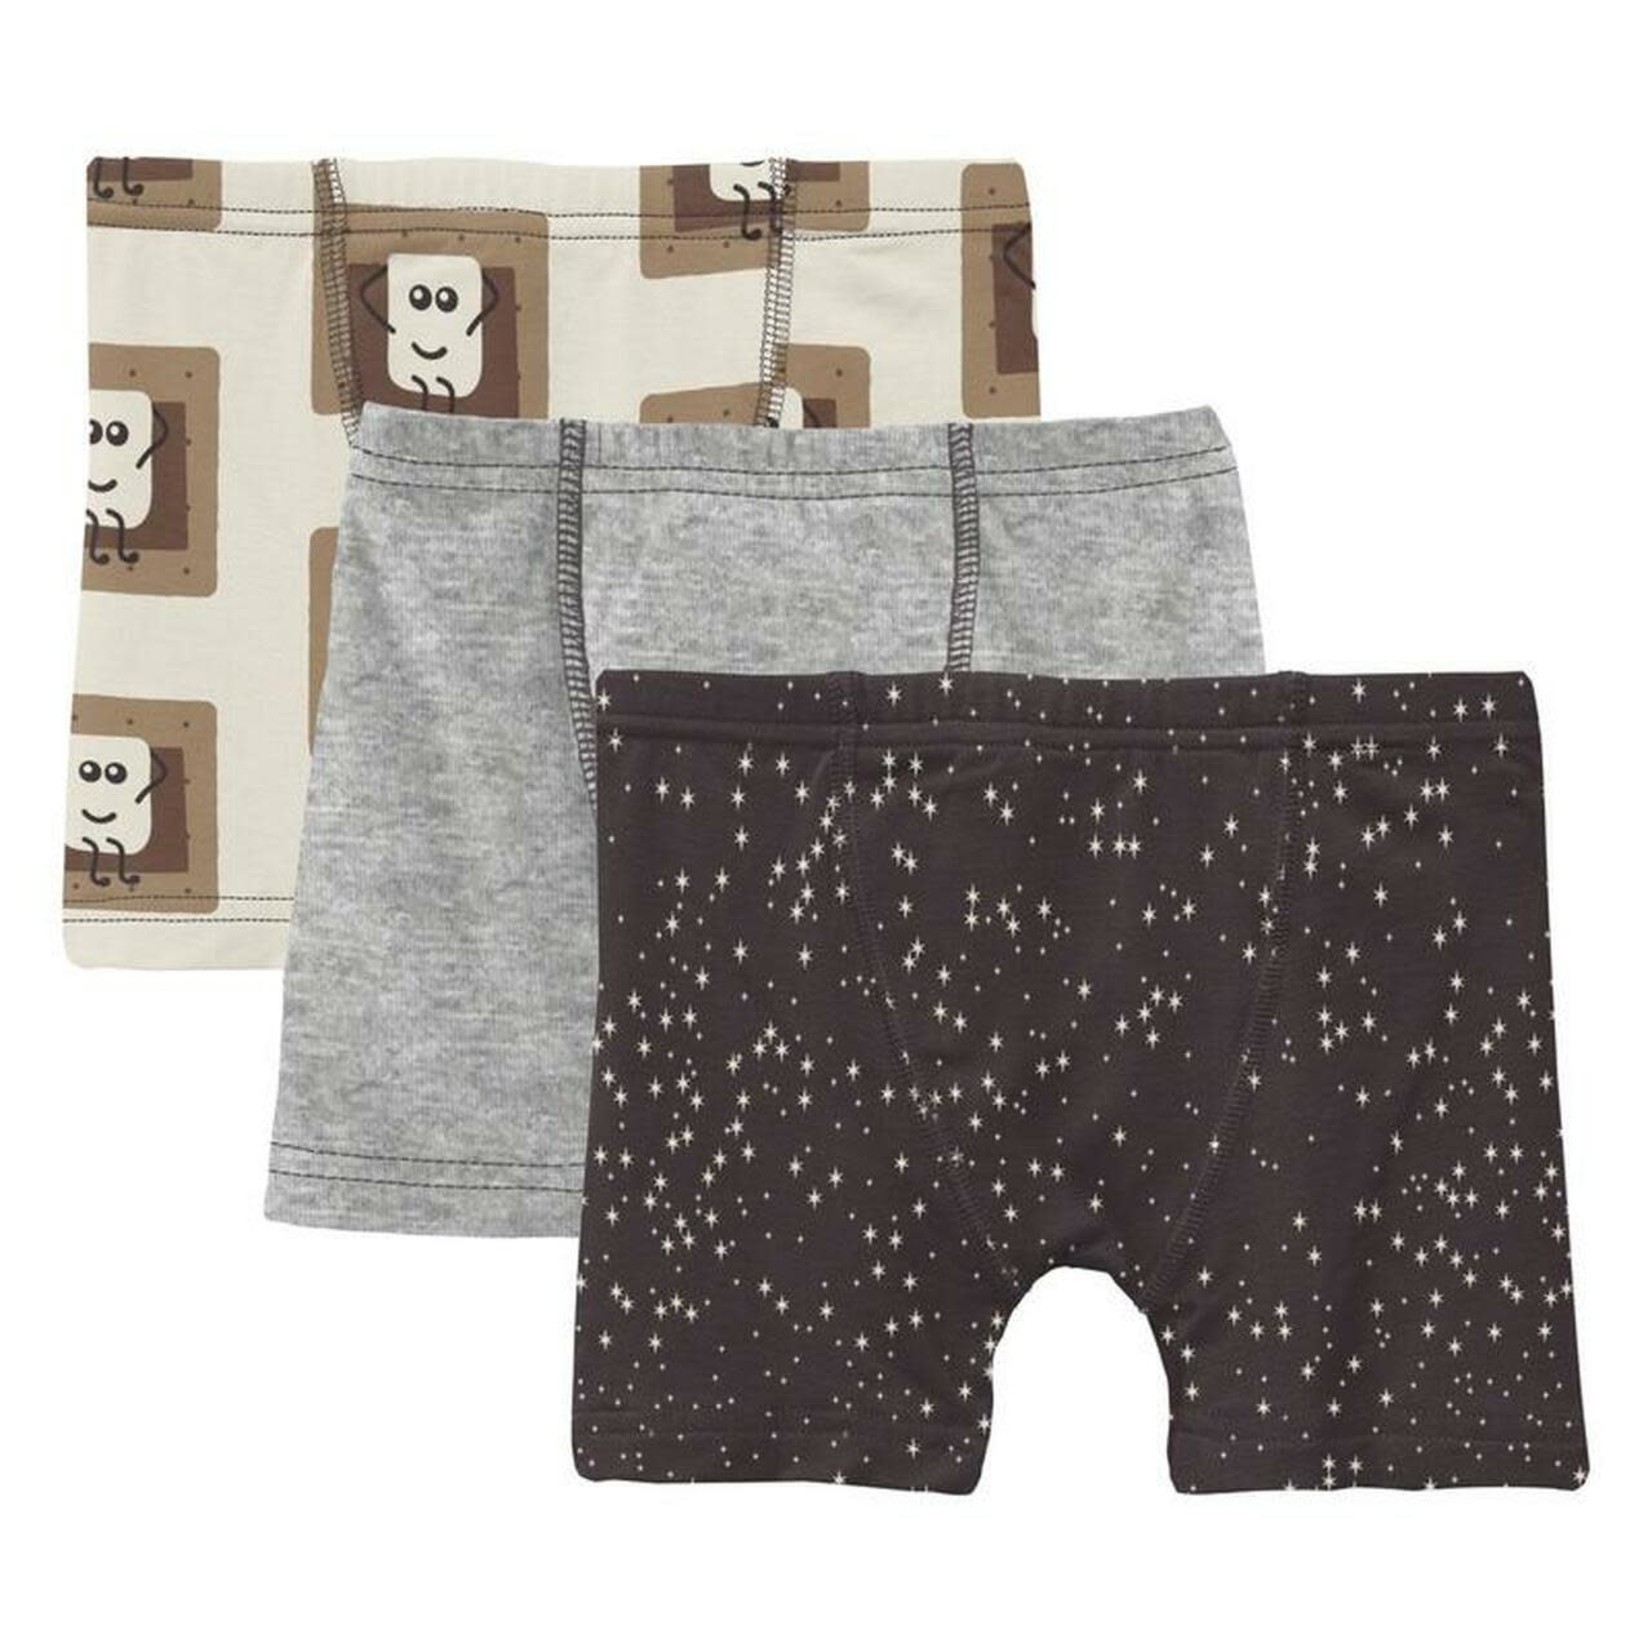 Kickee Pants Boxer Briefs Set - Natural S'mores, Heather Mist & Midnight Constellations 2T-3T